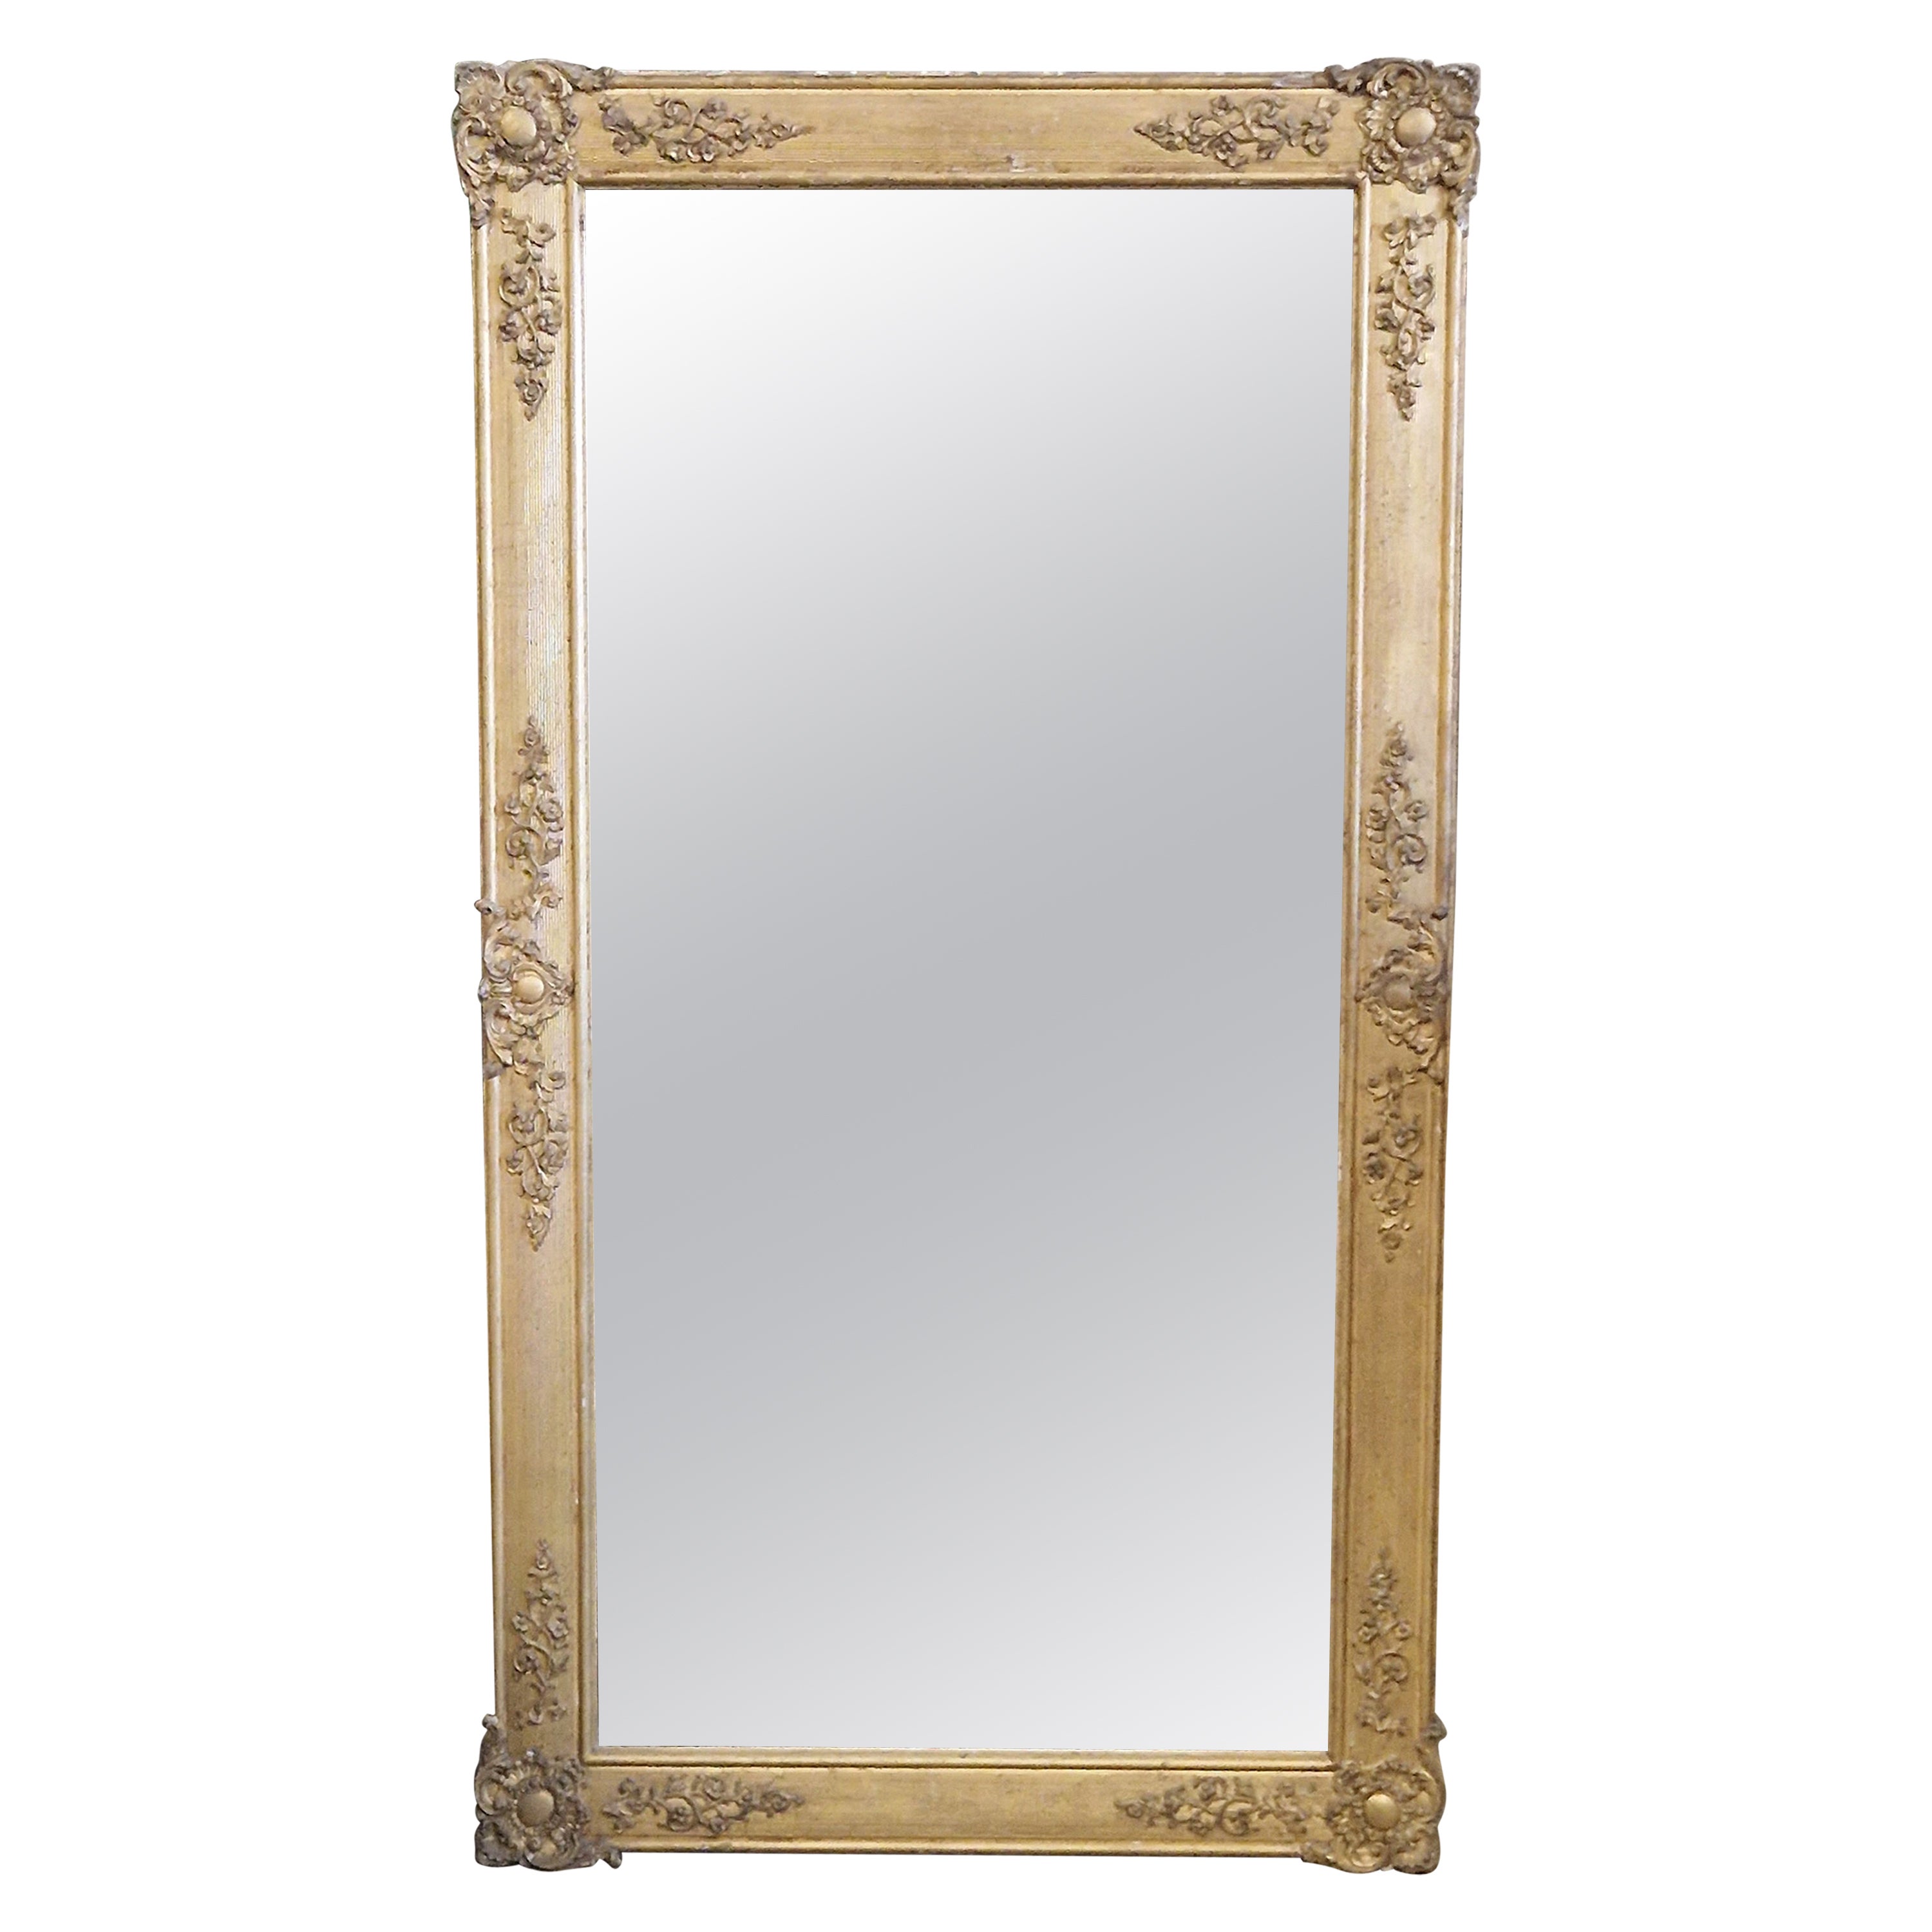 French Antique Mirror Original Gilt Wood Regency Style 19th Century For Sale